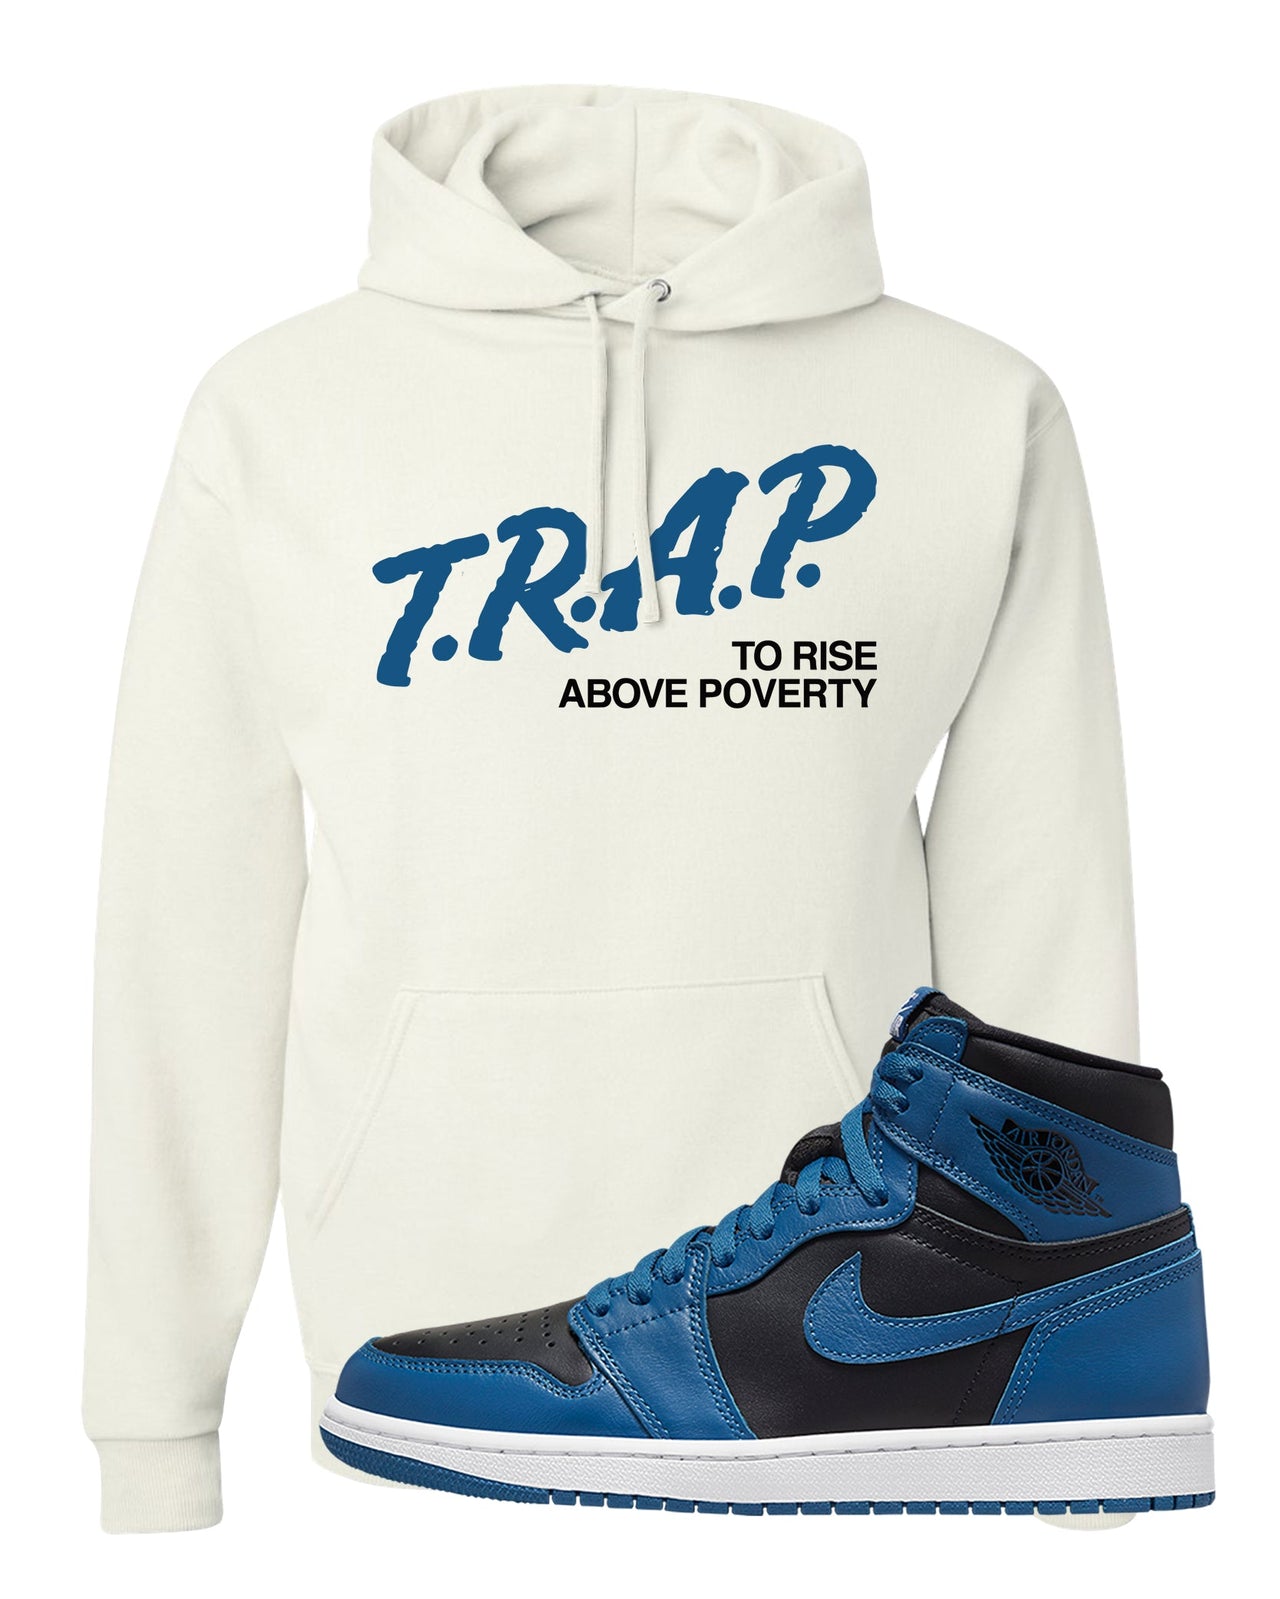 Dark Marina Blue 1s Hoodie | Trap To Rise Above Poverty, White